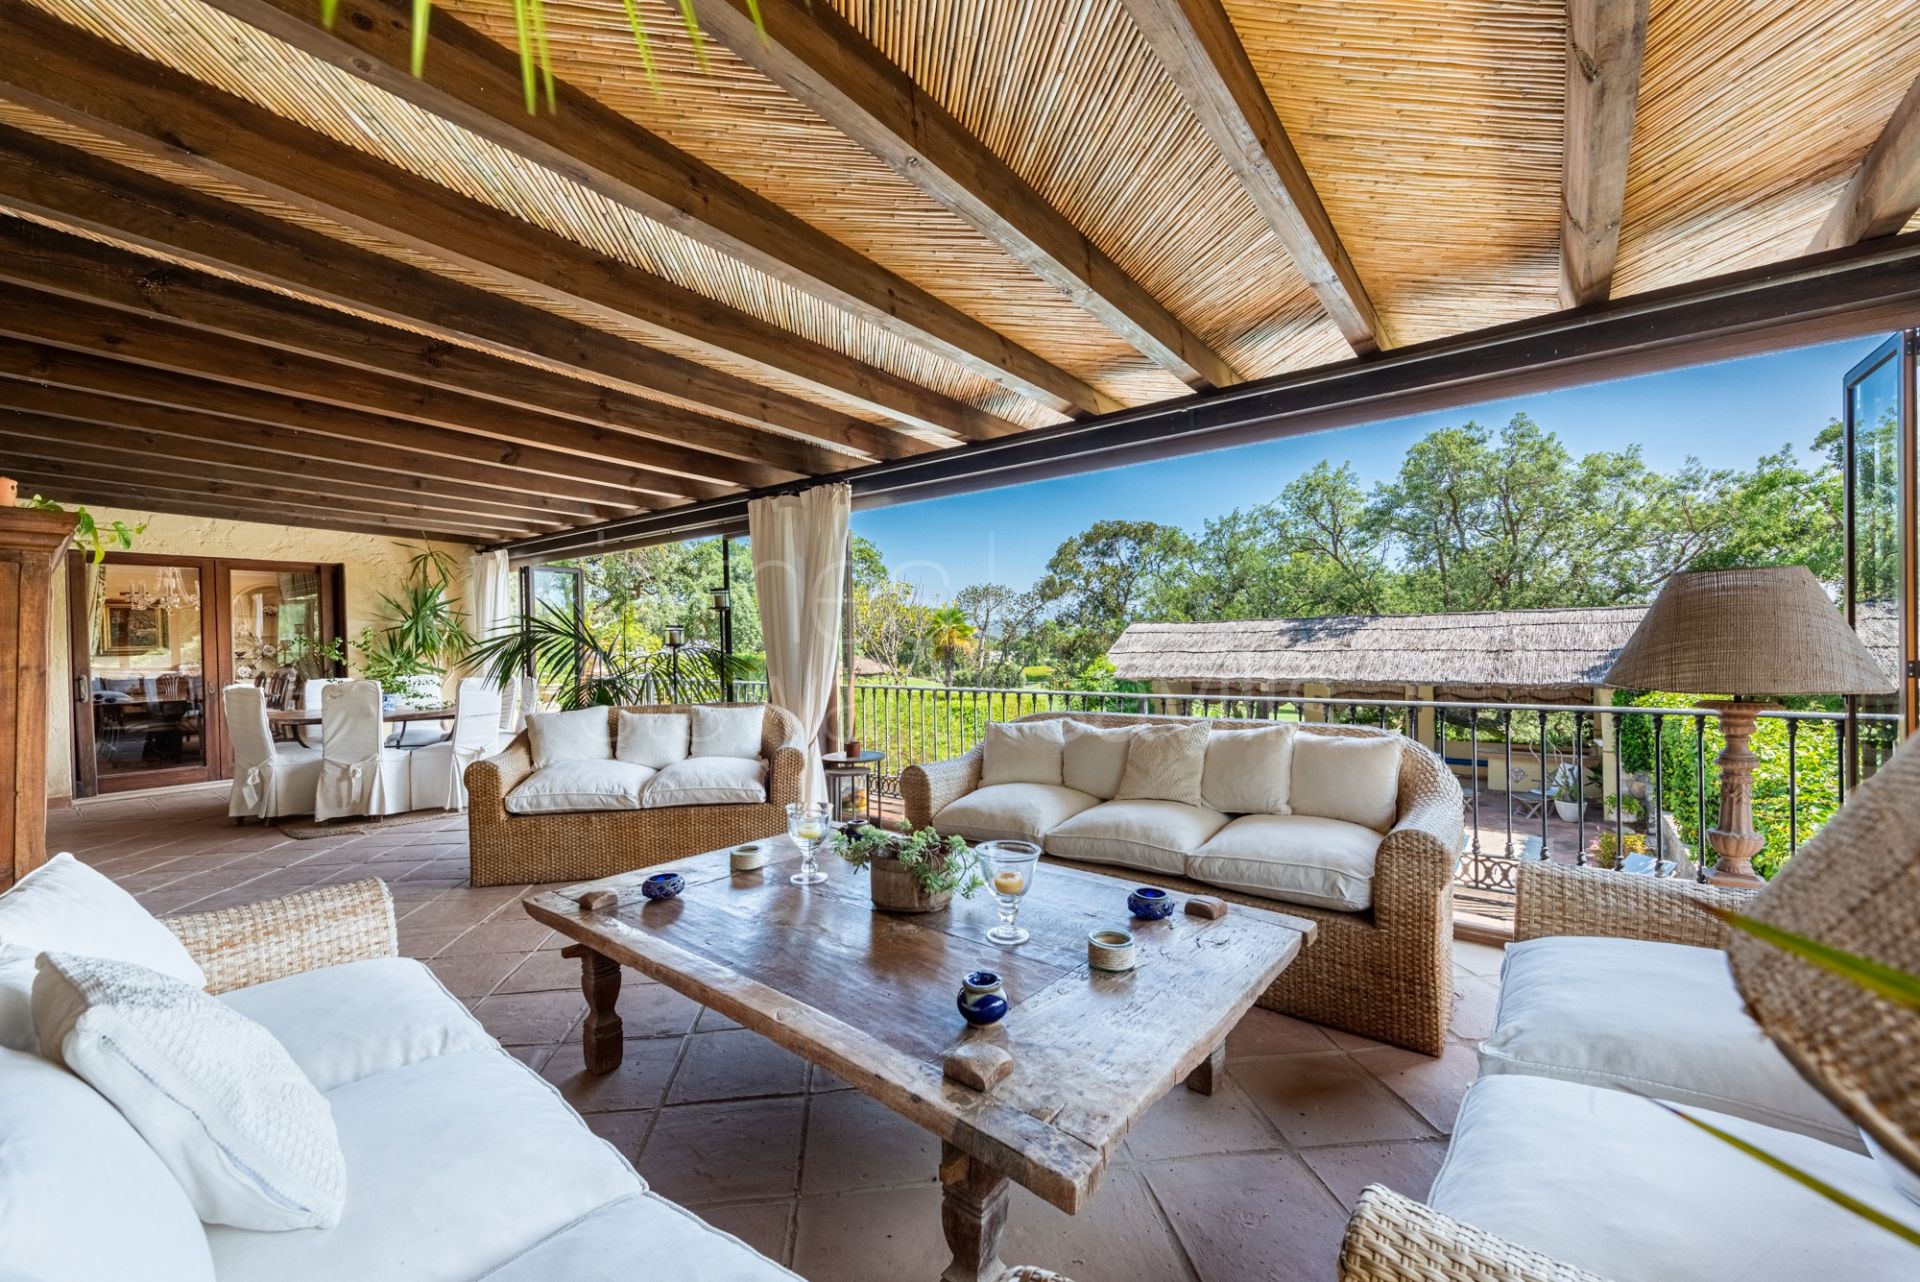 Unbeatable location frontline to Real Sotogrande Golf Course